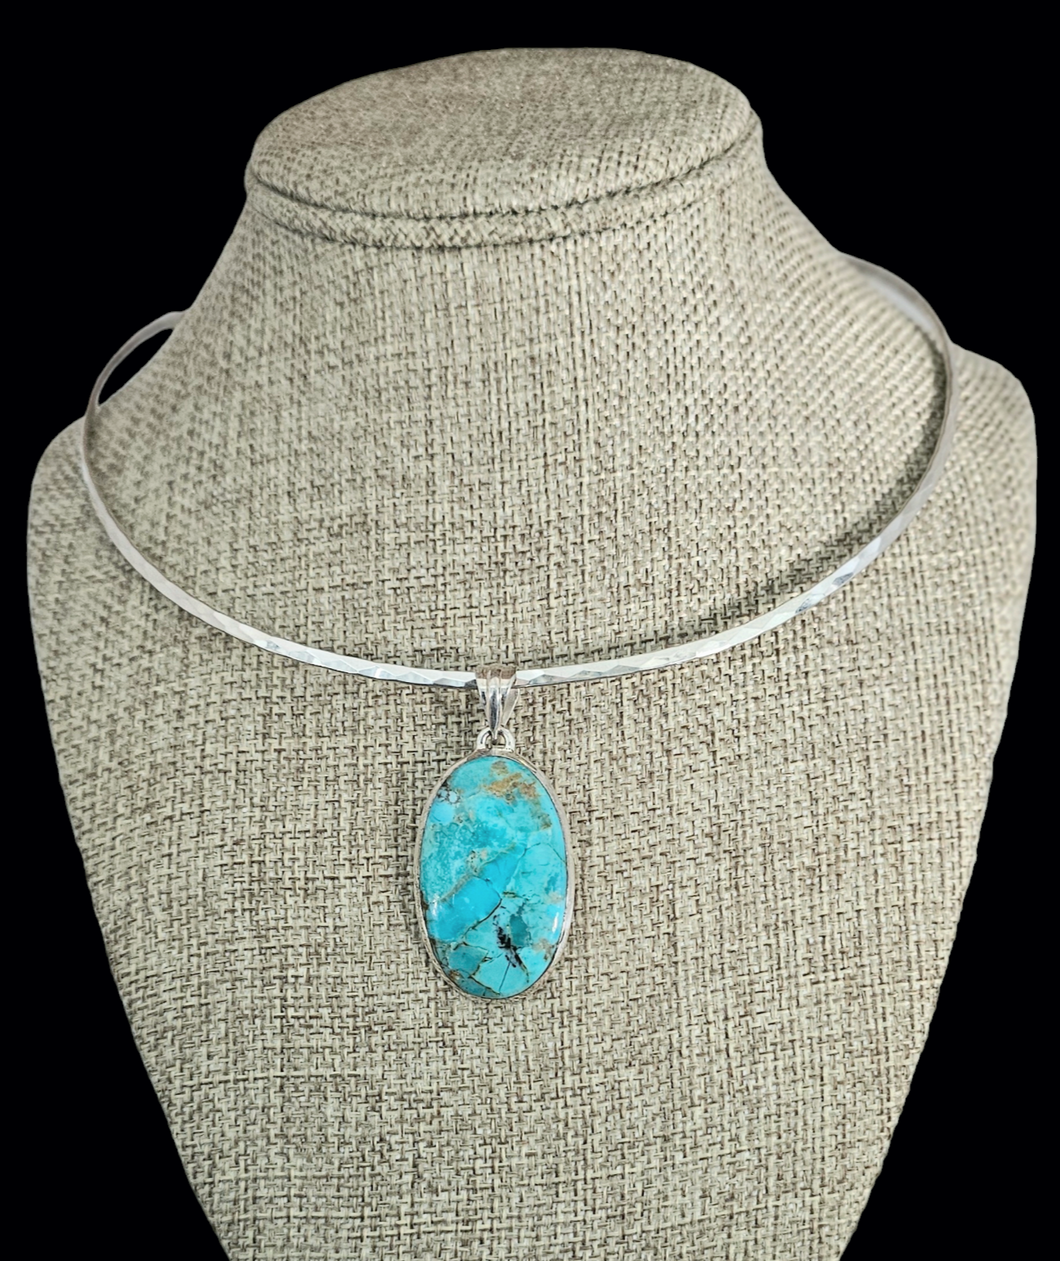 Sterling Silver Pendant with Kingsman Turquoise